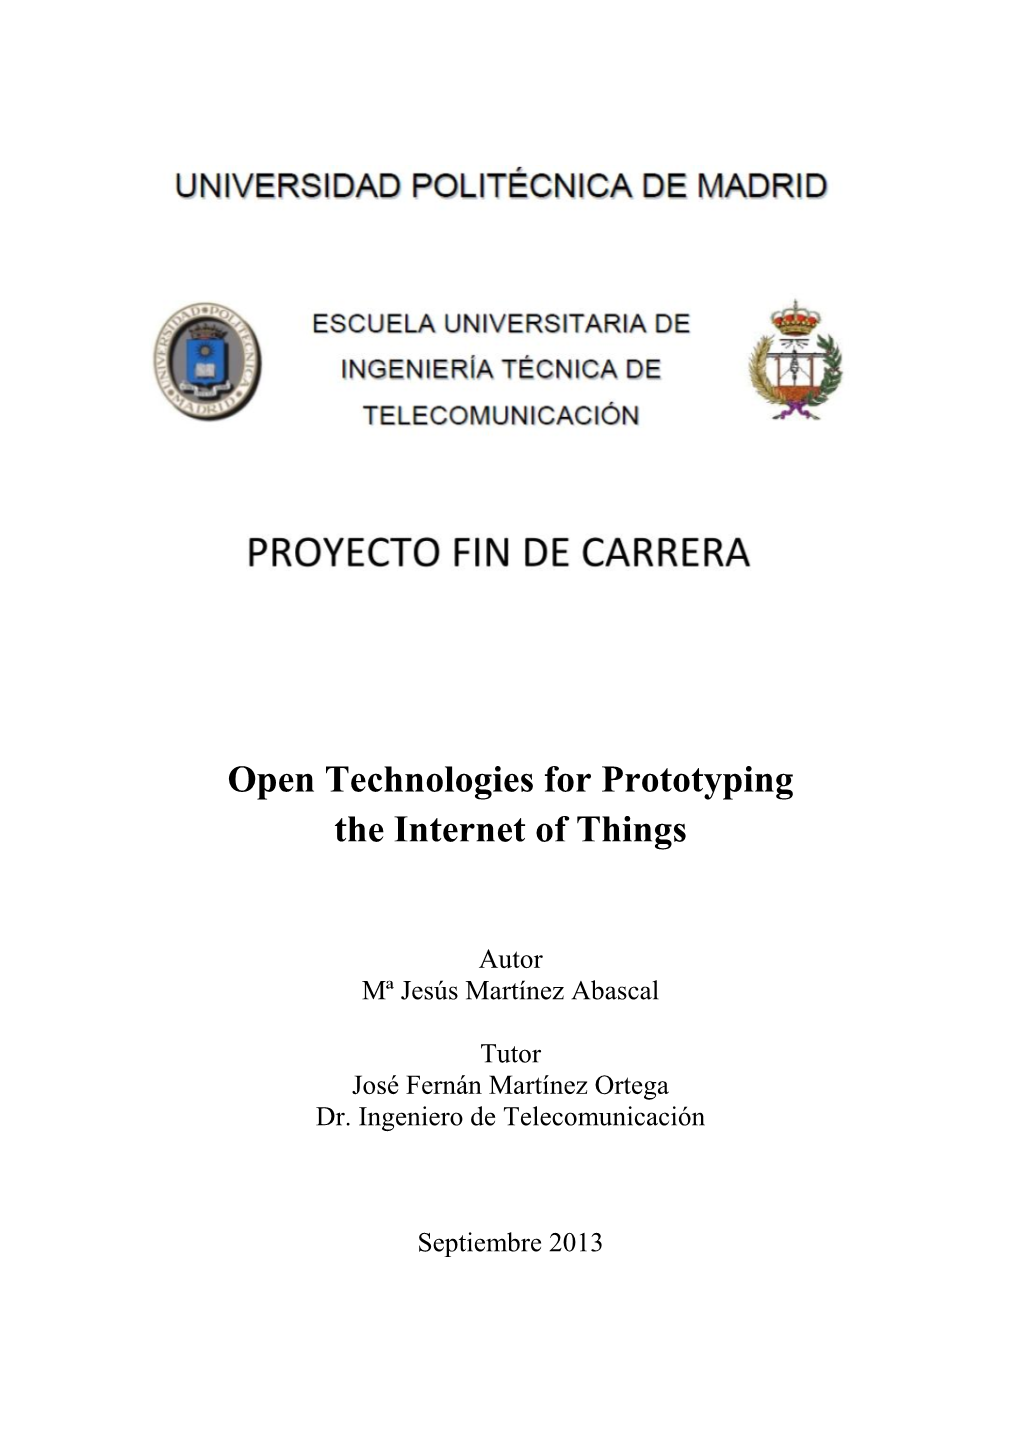 Open Technologies for Prototyping the Internet of Things